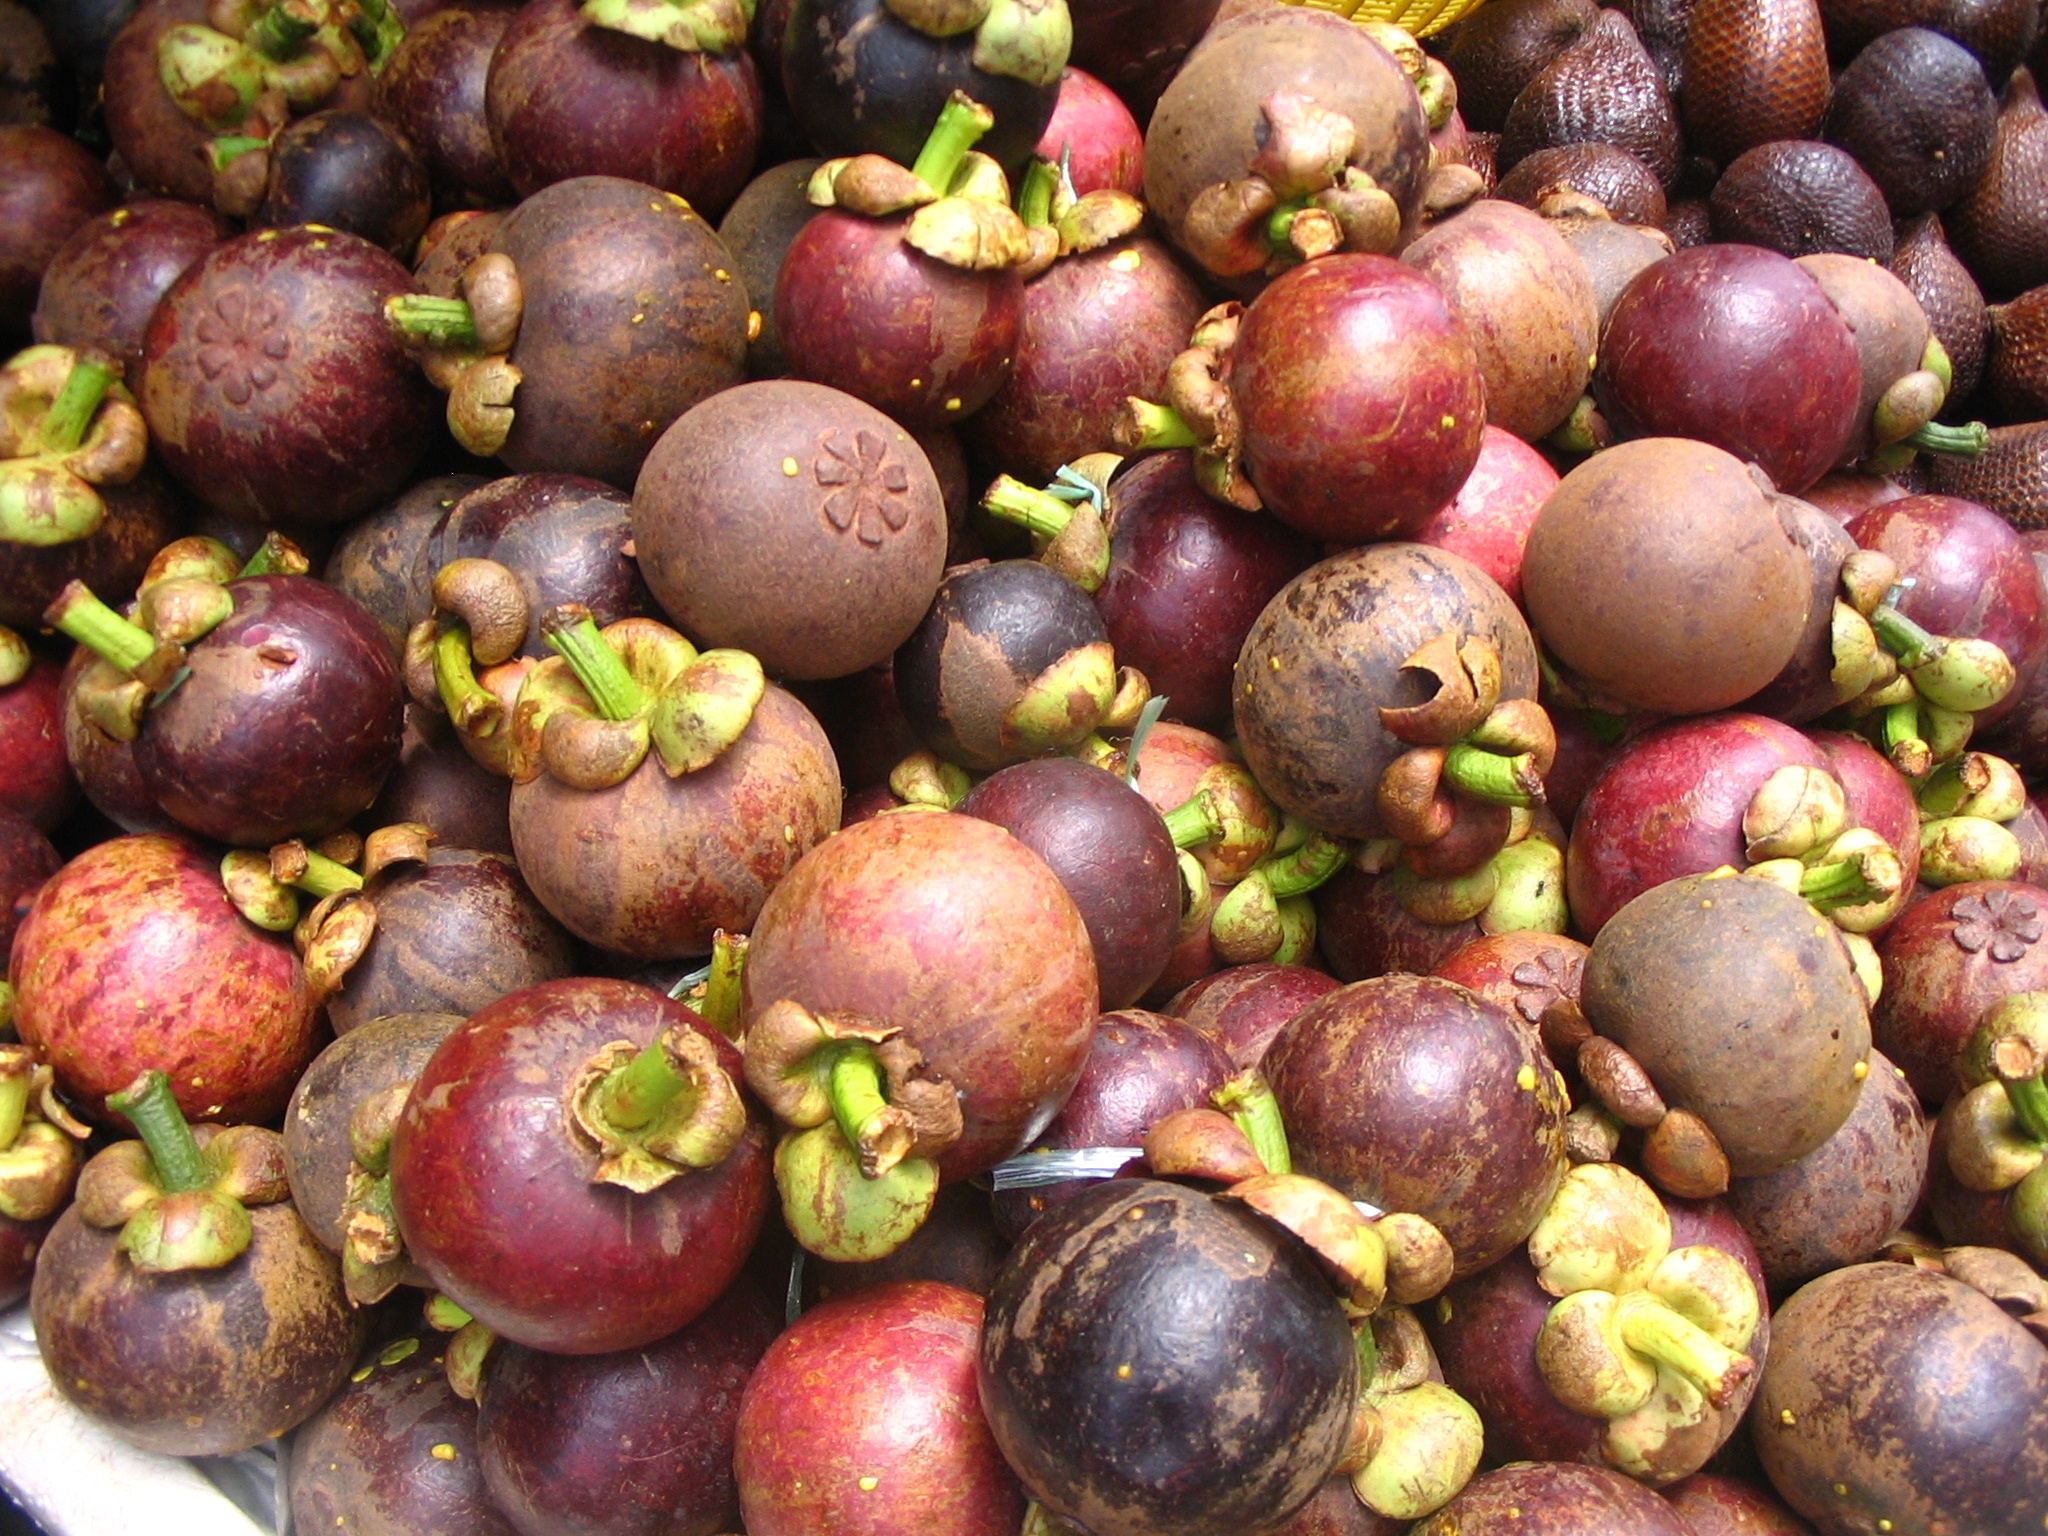 Mangosteen: Dark-purple or red-purple fruit with soft, thick rind on the surface. 2050x1540 HD Wallpaper.